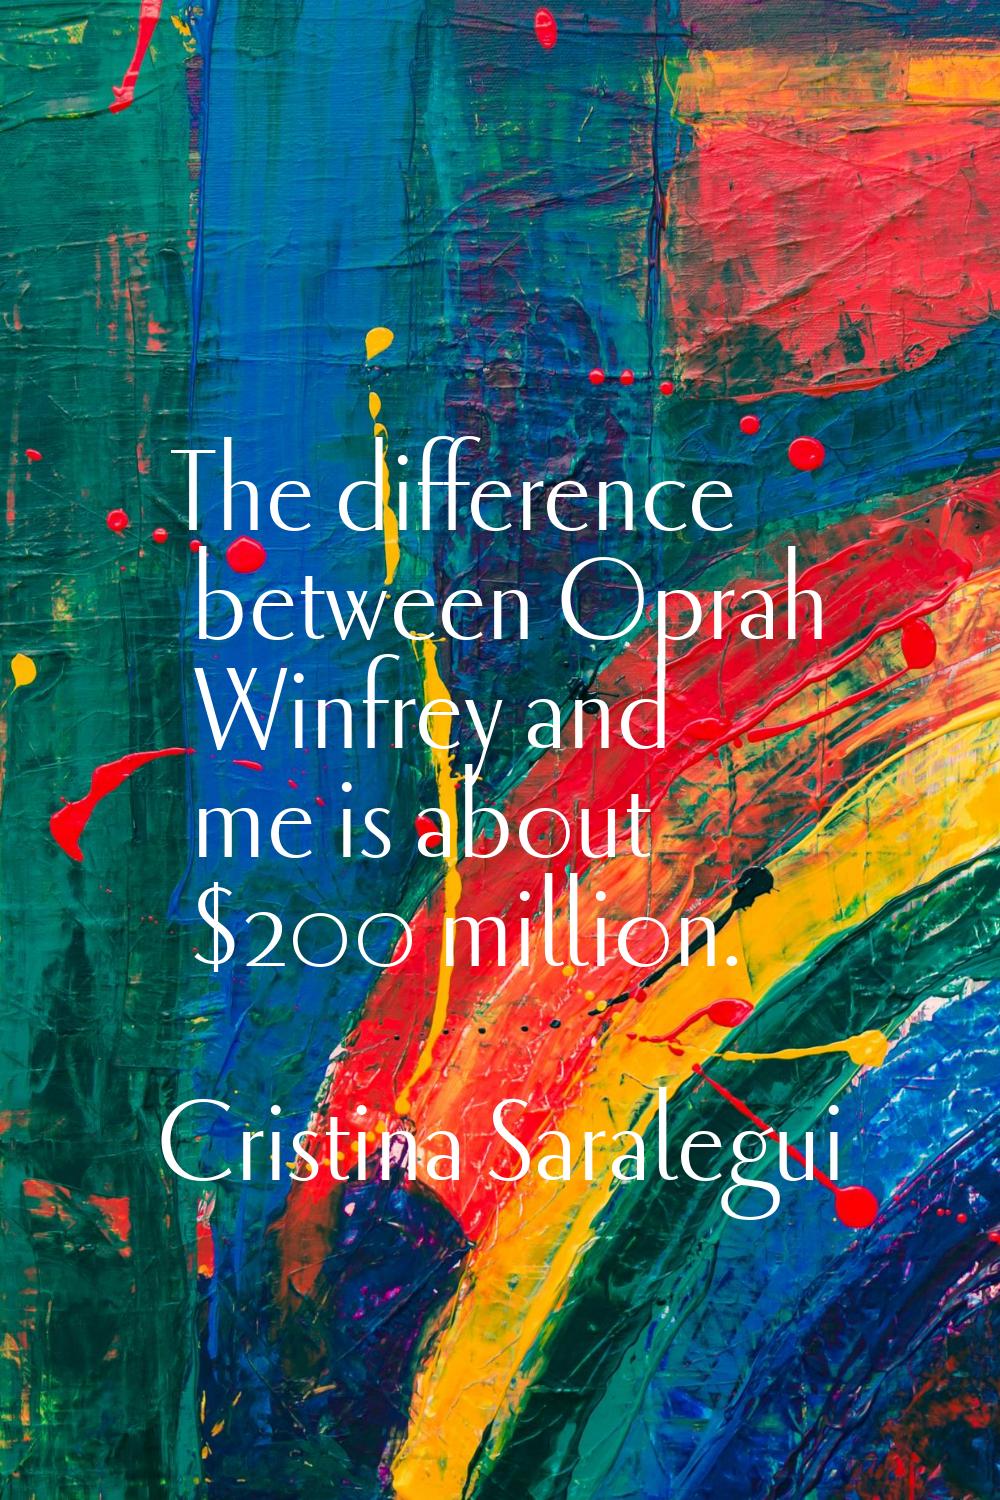 The difference between Oprah Winfrey and me is about $200 million.